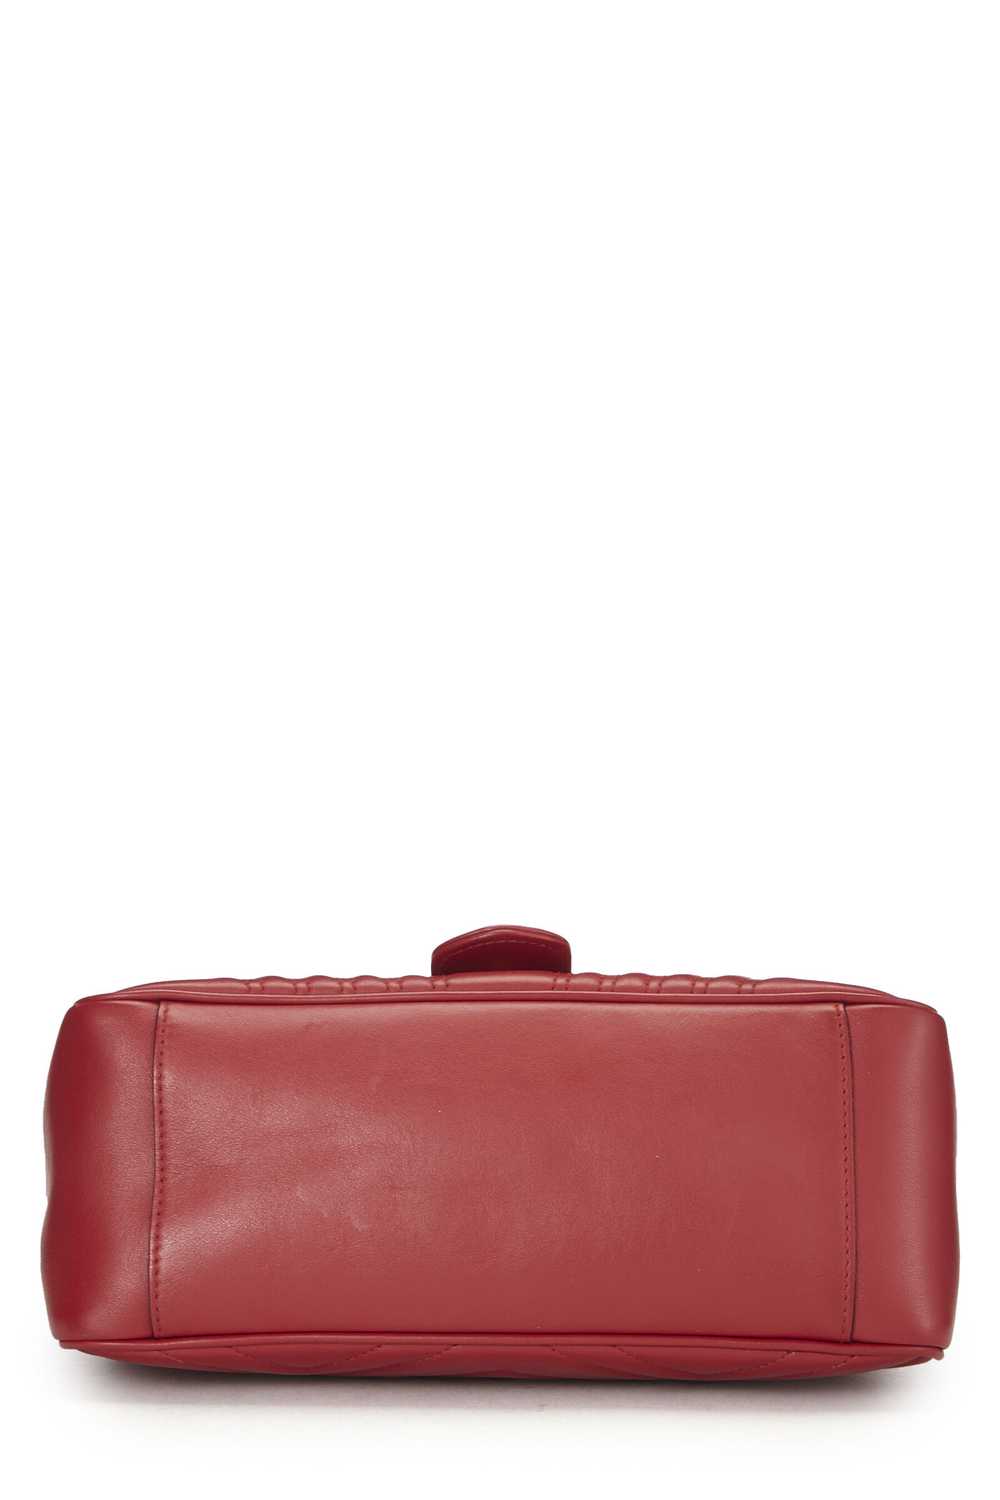 Red Leather GG Marmont Top Handle Bag Small - image 5